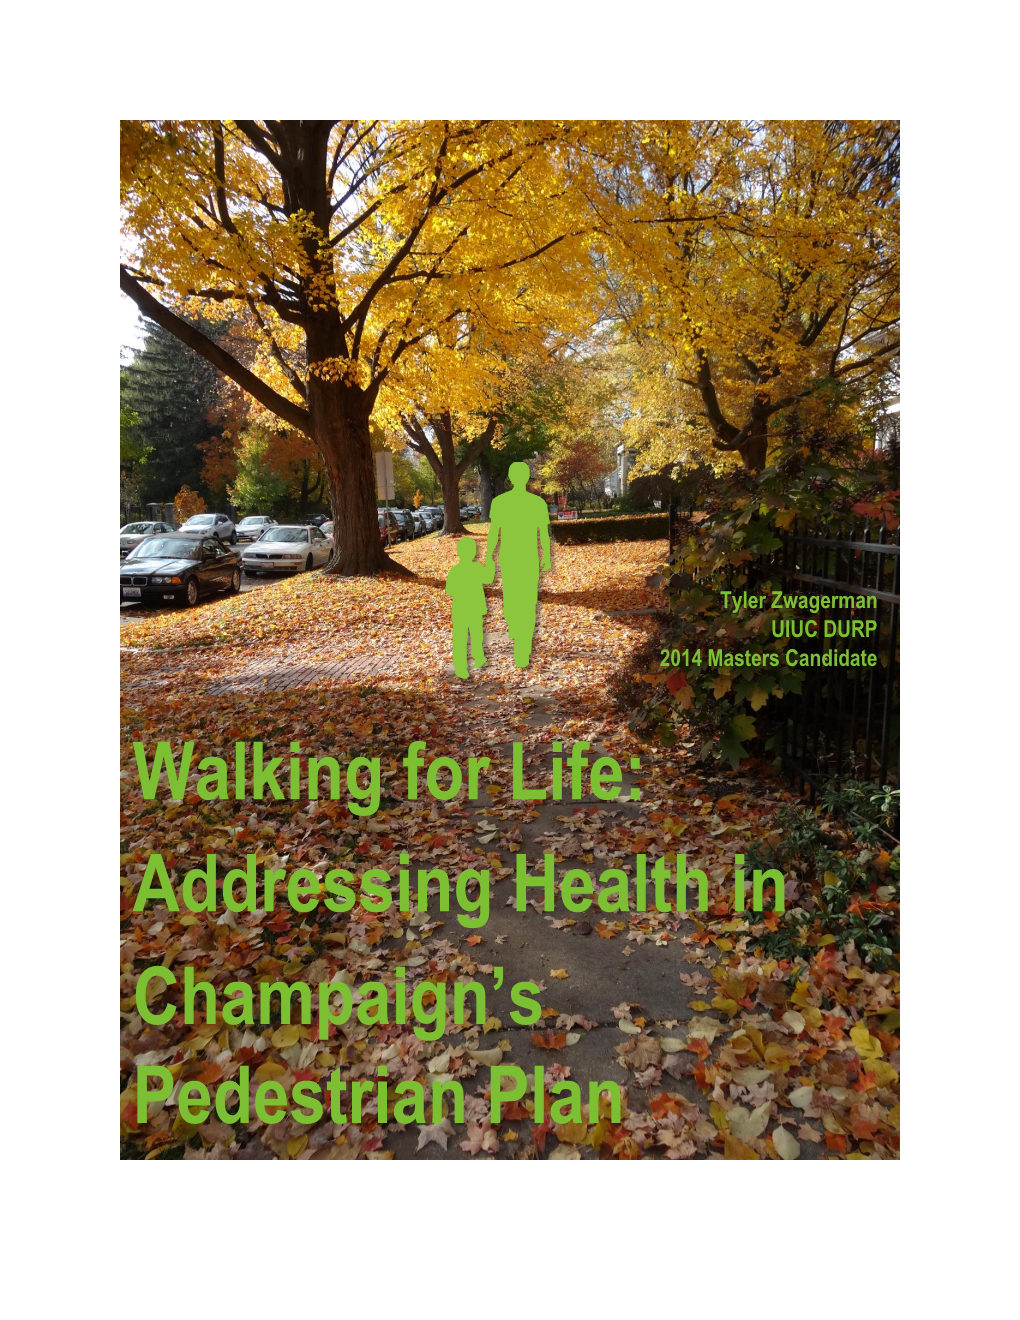 Walking for Life: Addressing Health in Champaign's